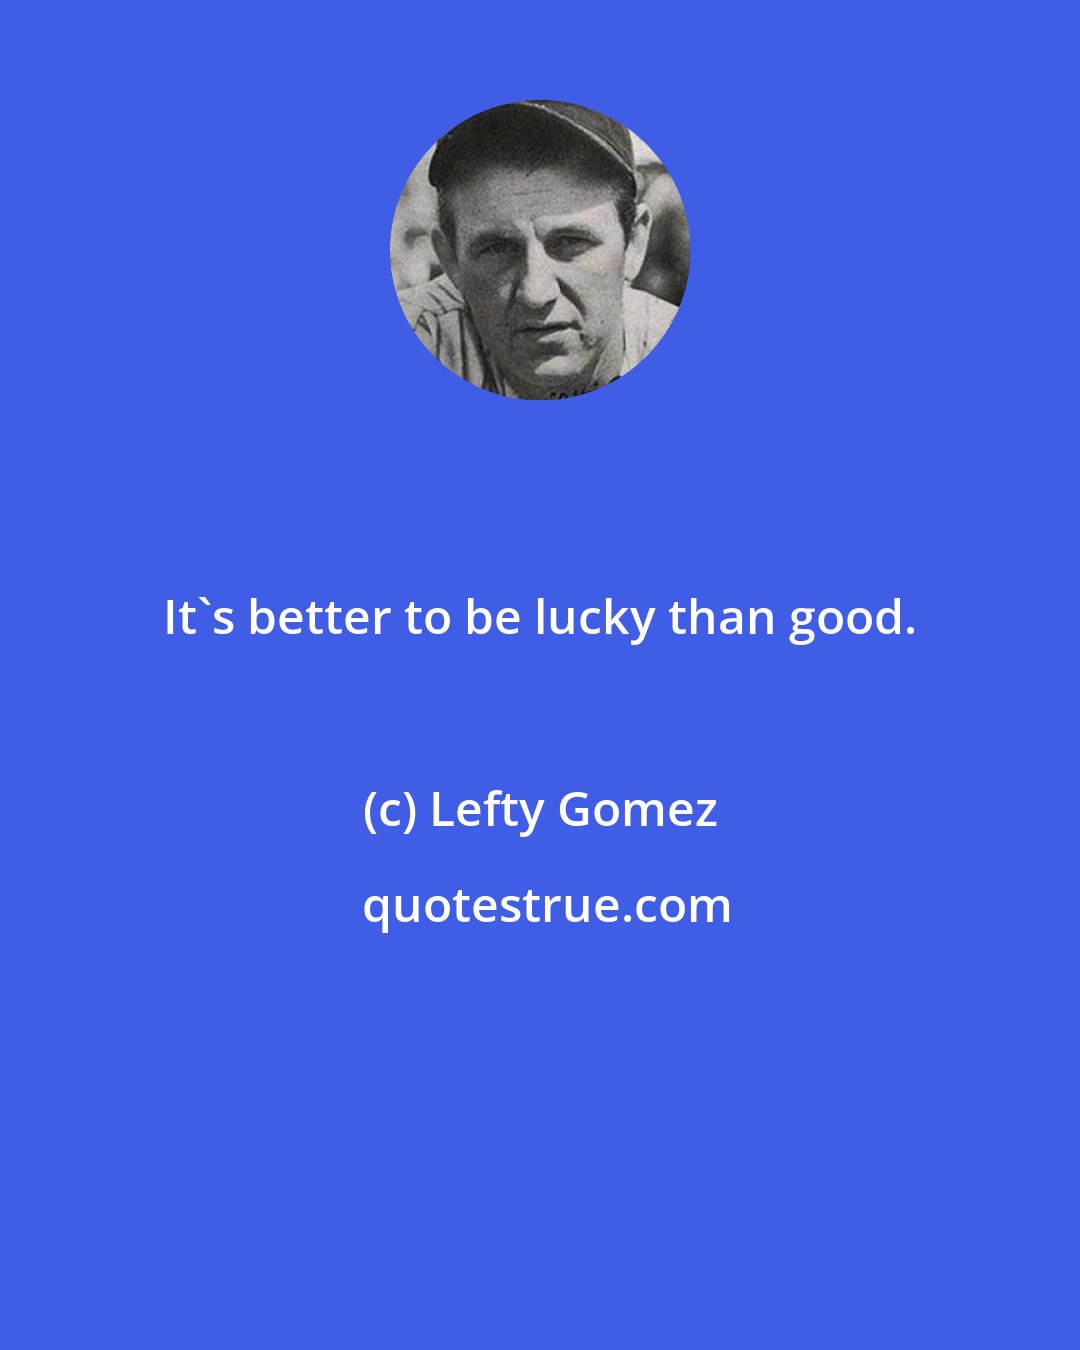 Lefty Gomez: It's better to be lucky than good.